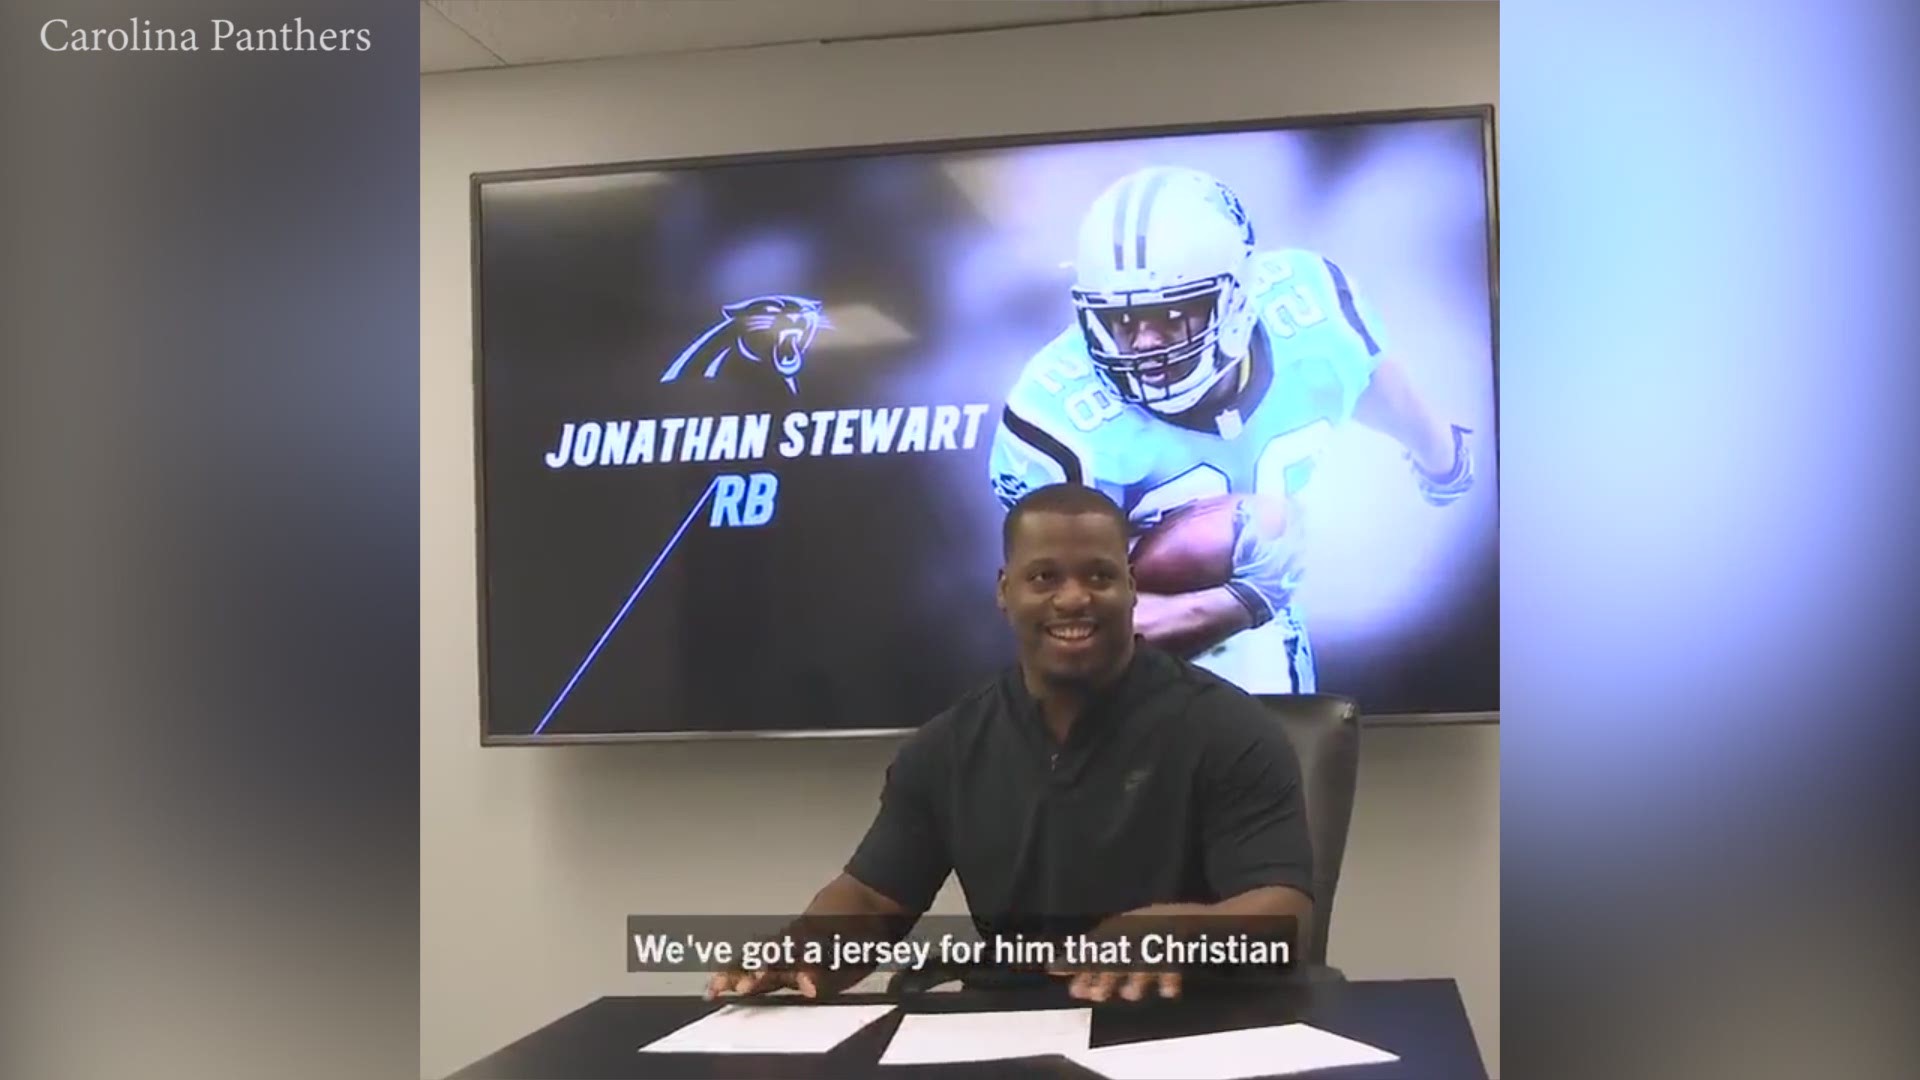 The Panthers presented Jonathan Stewart with a jersey on the same day he signed a one-day contract to retire as part of the Carolina team.